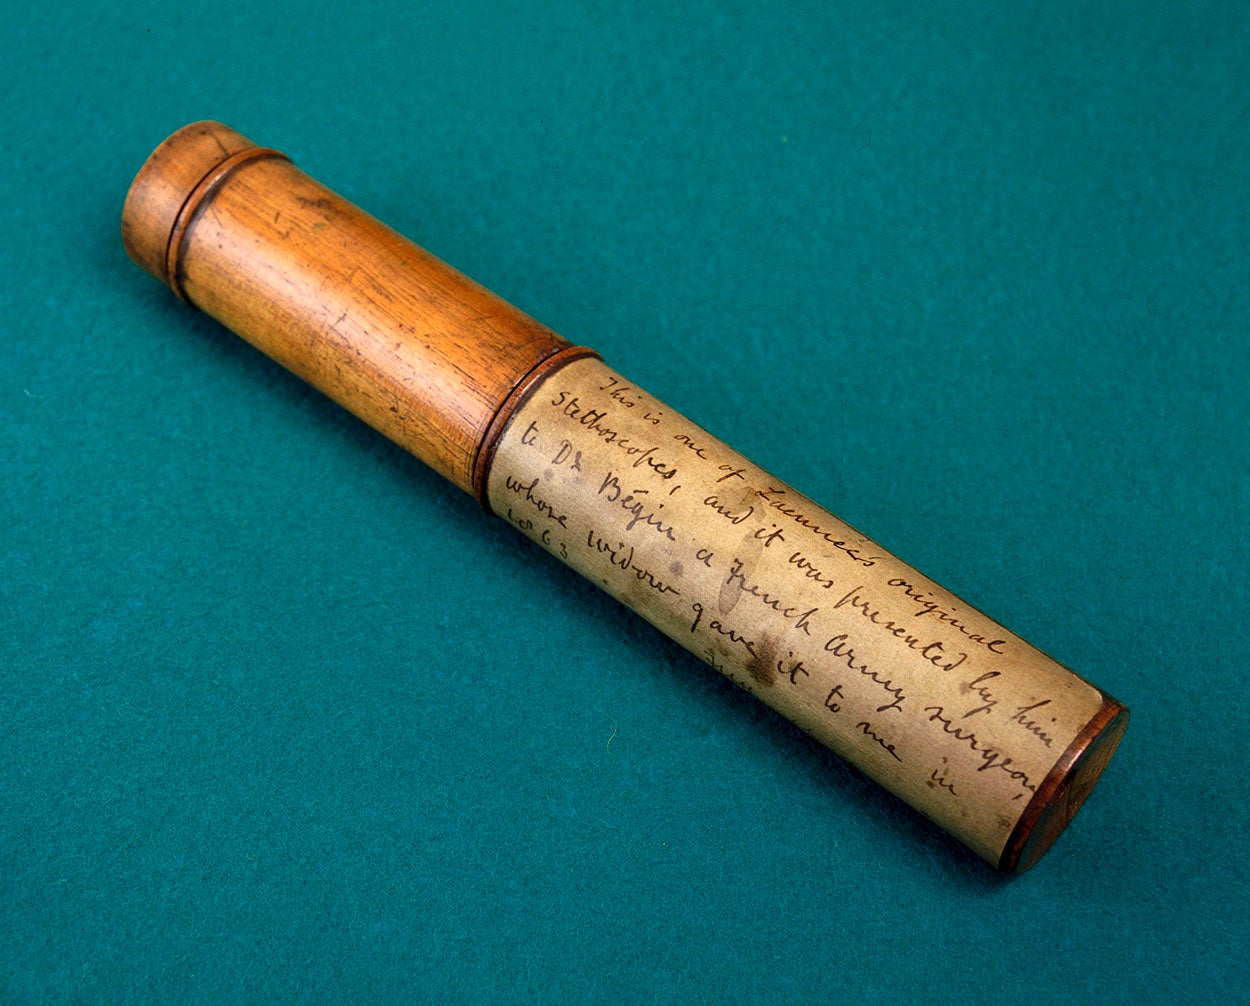 One of the original stethoscopes (c.1820) belonging to Dr Laennec made from wood and brass